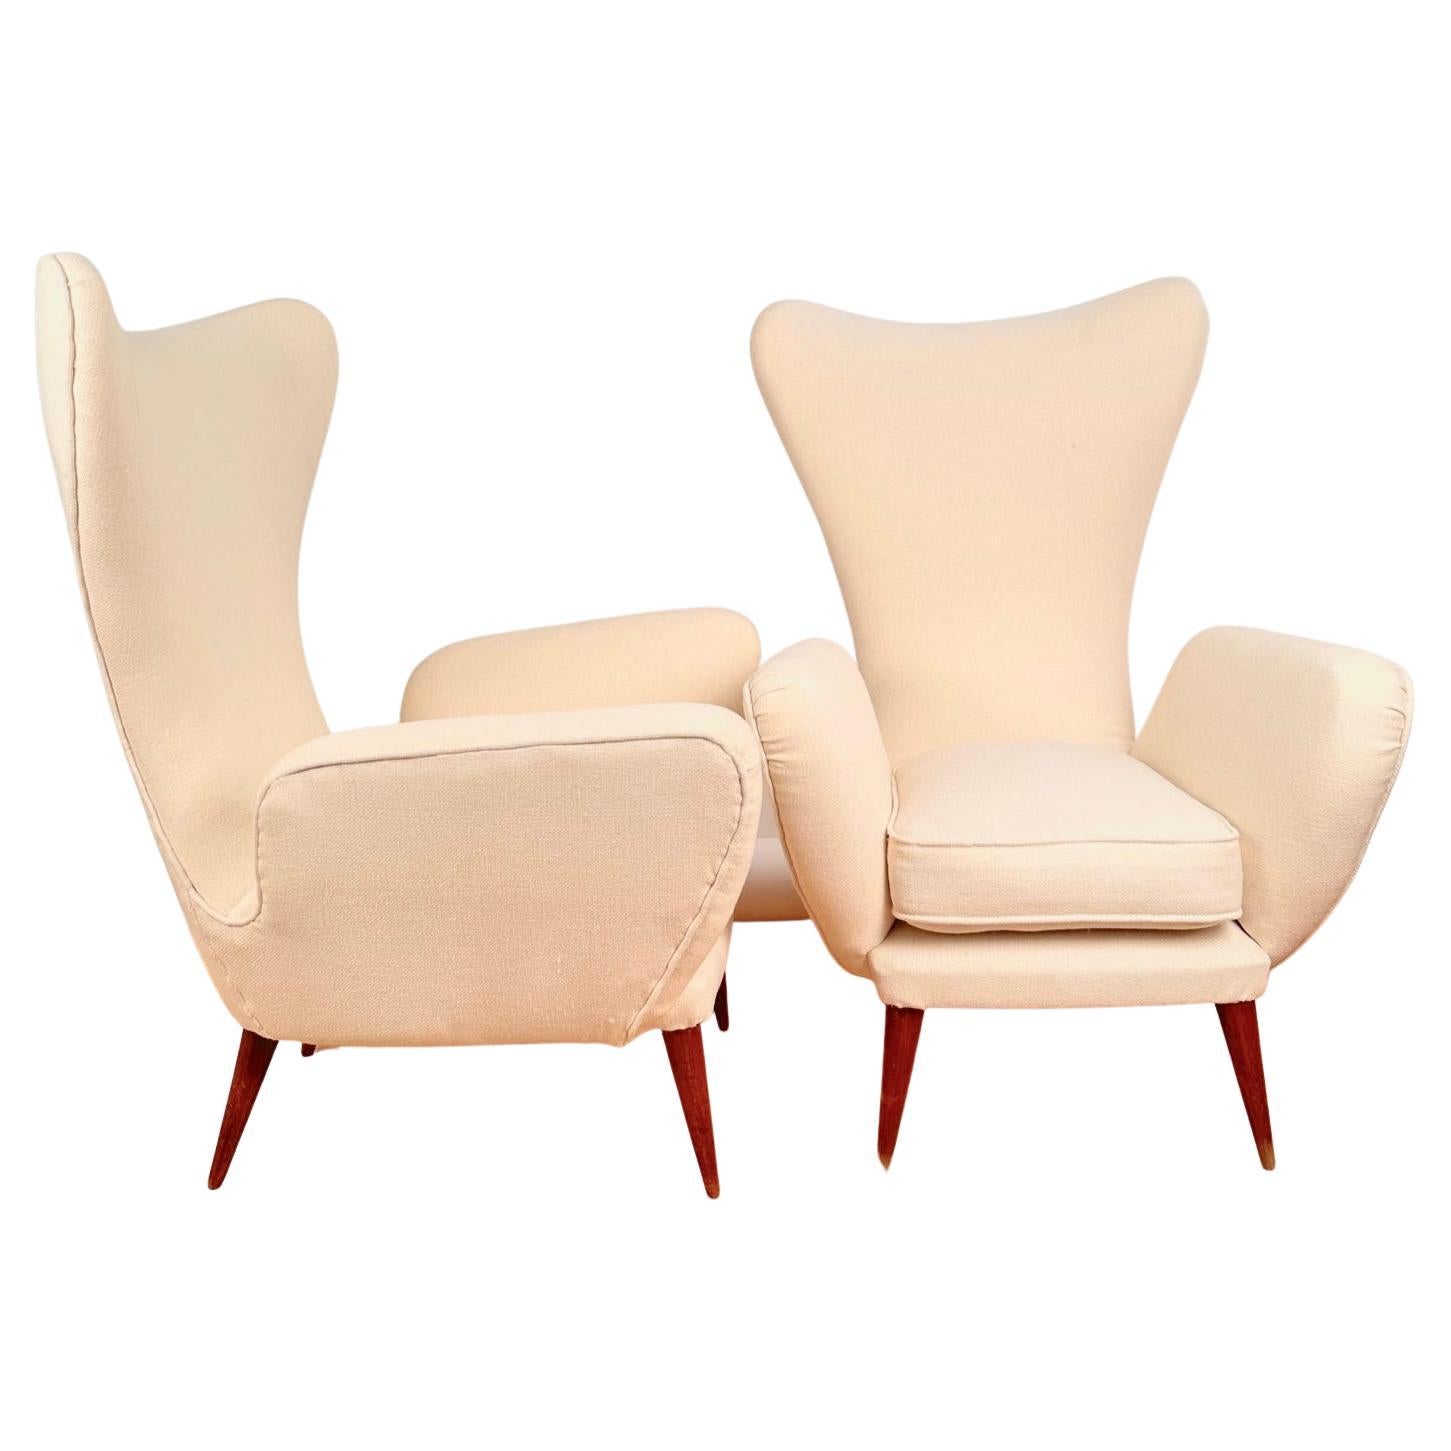 Pair of Midcentury High Back Armchairs by E. Sala and G. Madini, Kvadrat Fabric For Sale